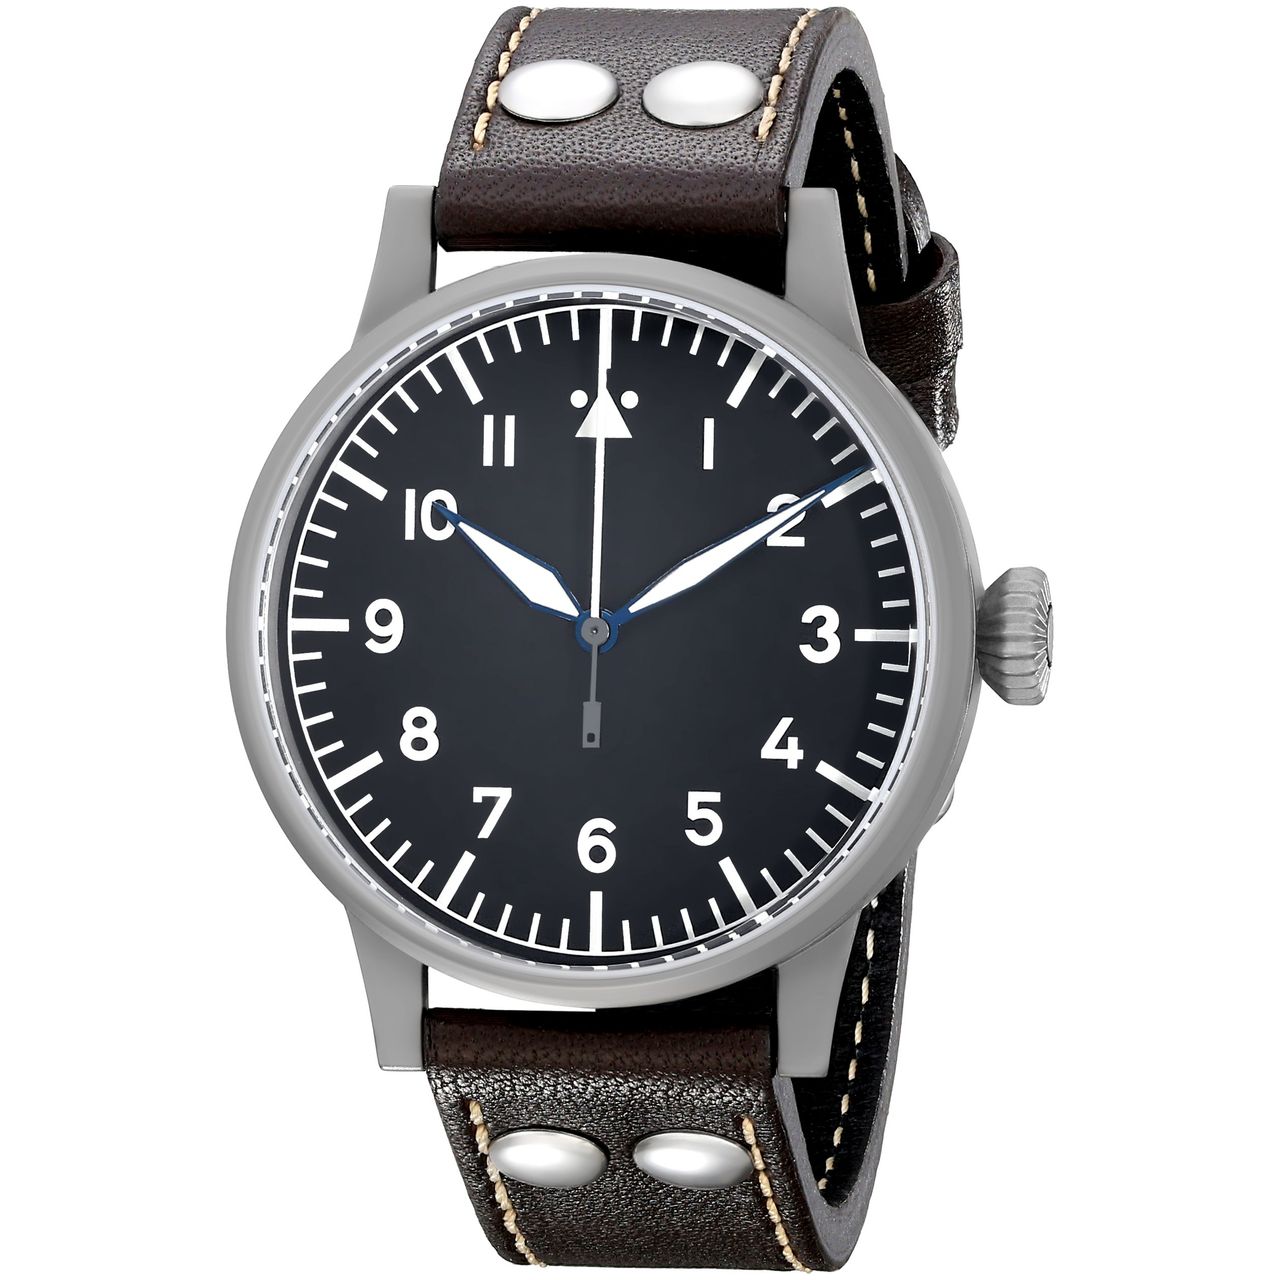 Laco/1925 Laco / 1925 Men's 861748 Laco 1925 Pilot Classic Stainless Steel Watch